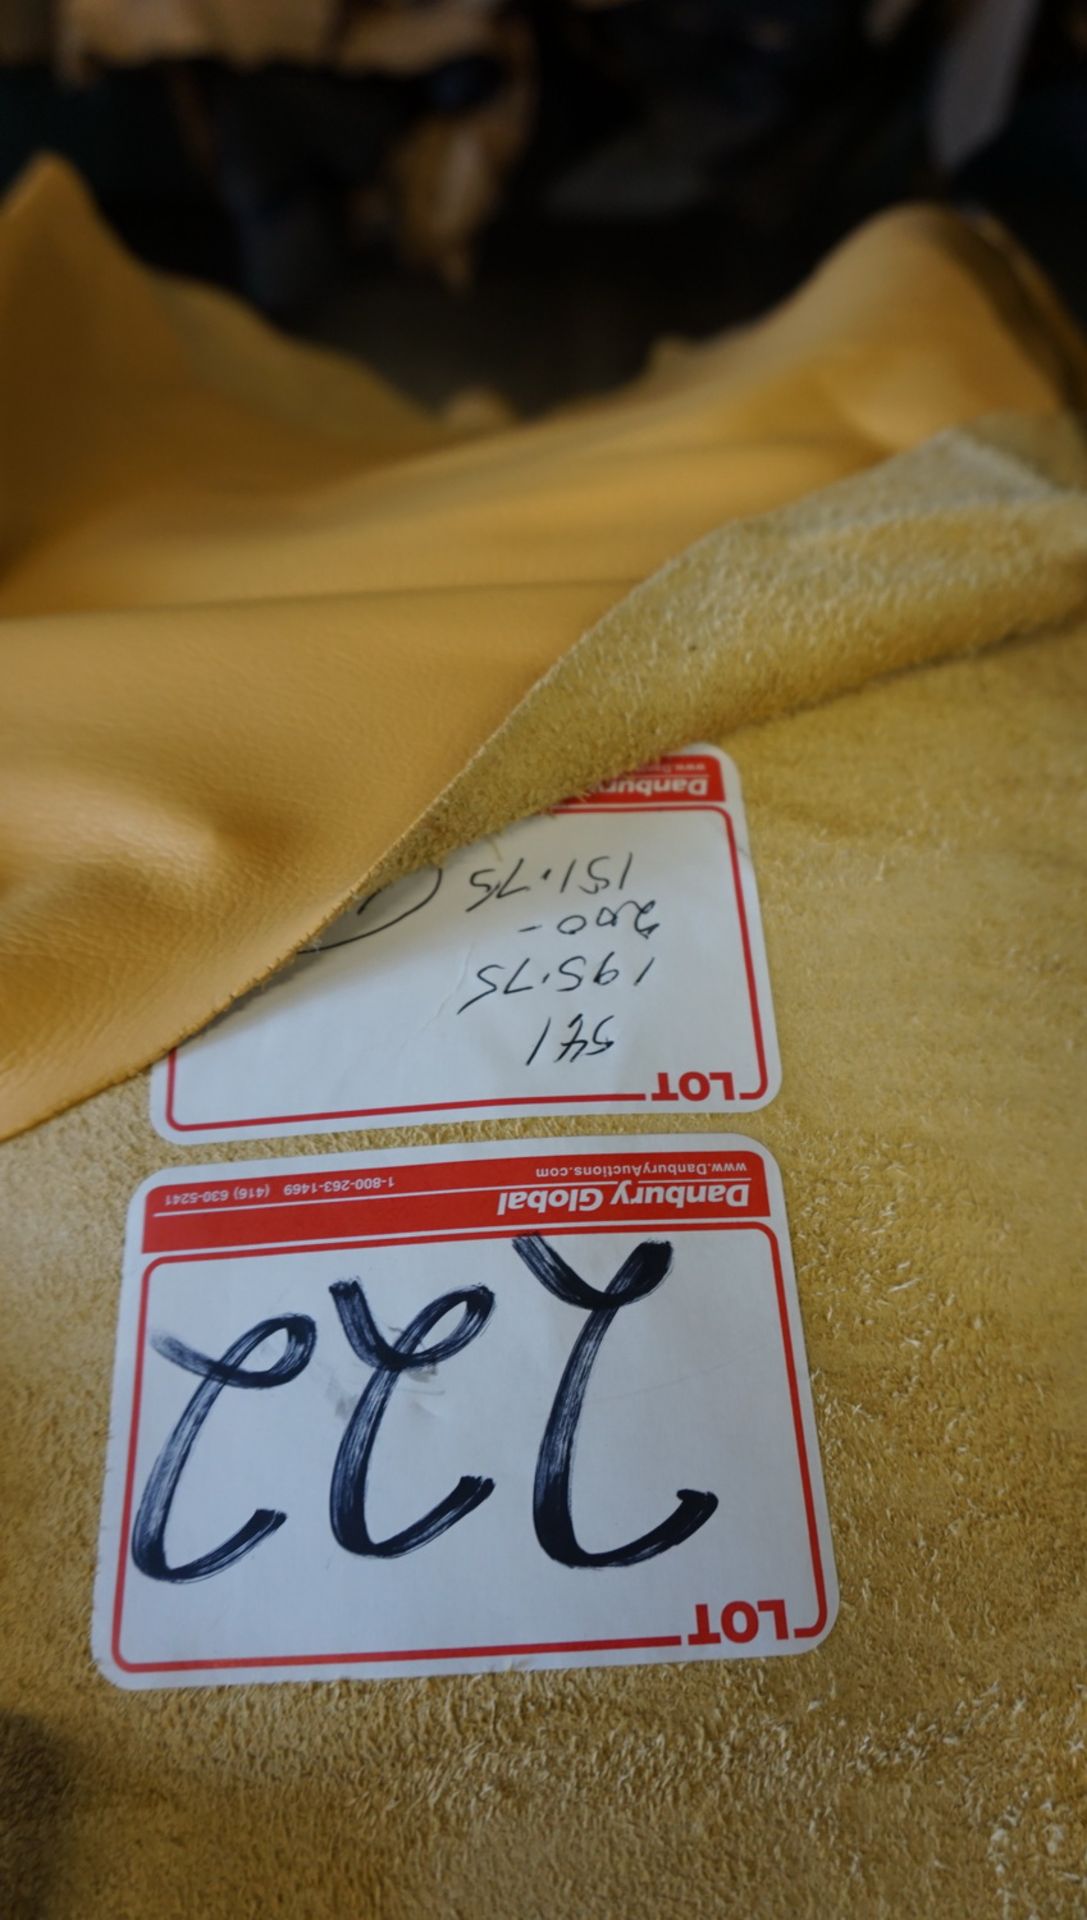 LOT - 601 SQFT - YELLOW UPHOLSTERY LEATHER - Image 2 of 2